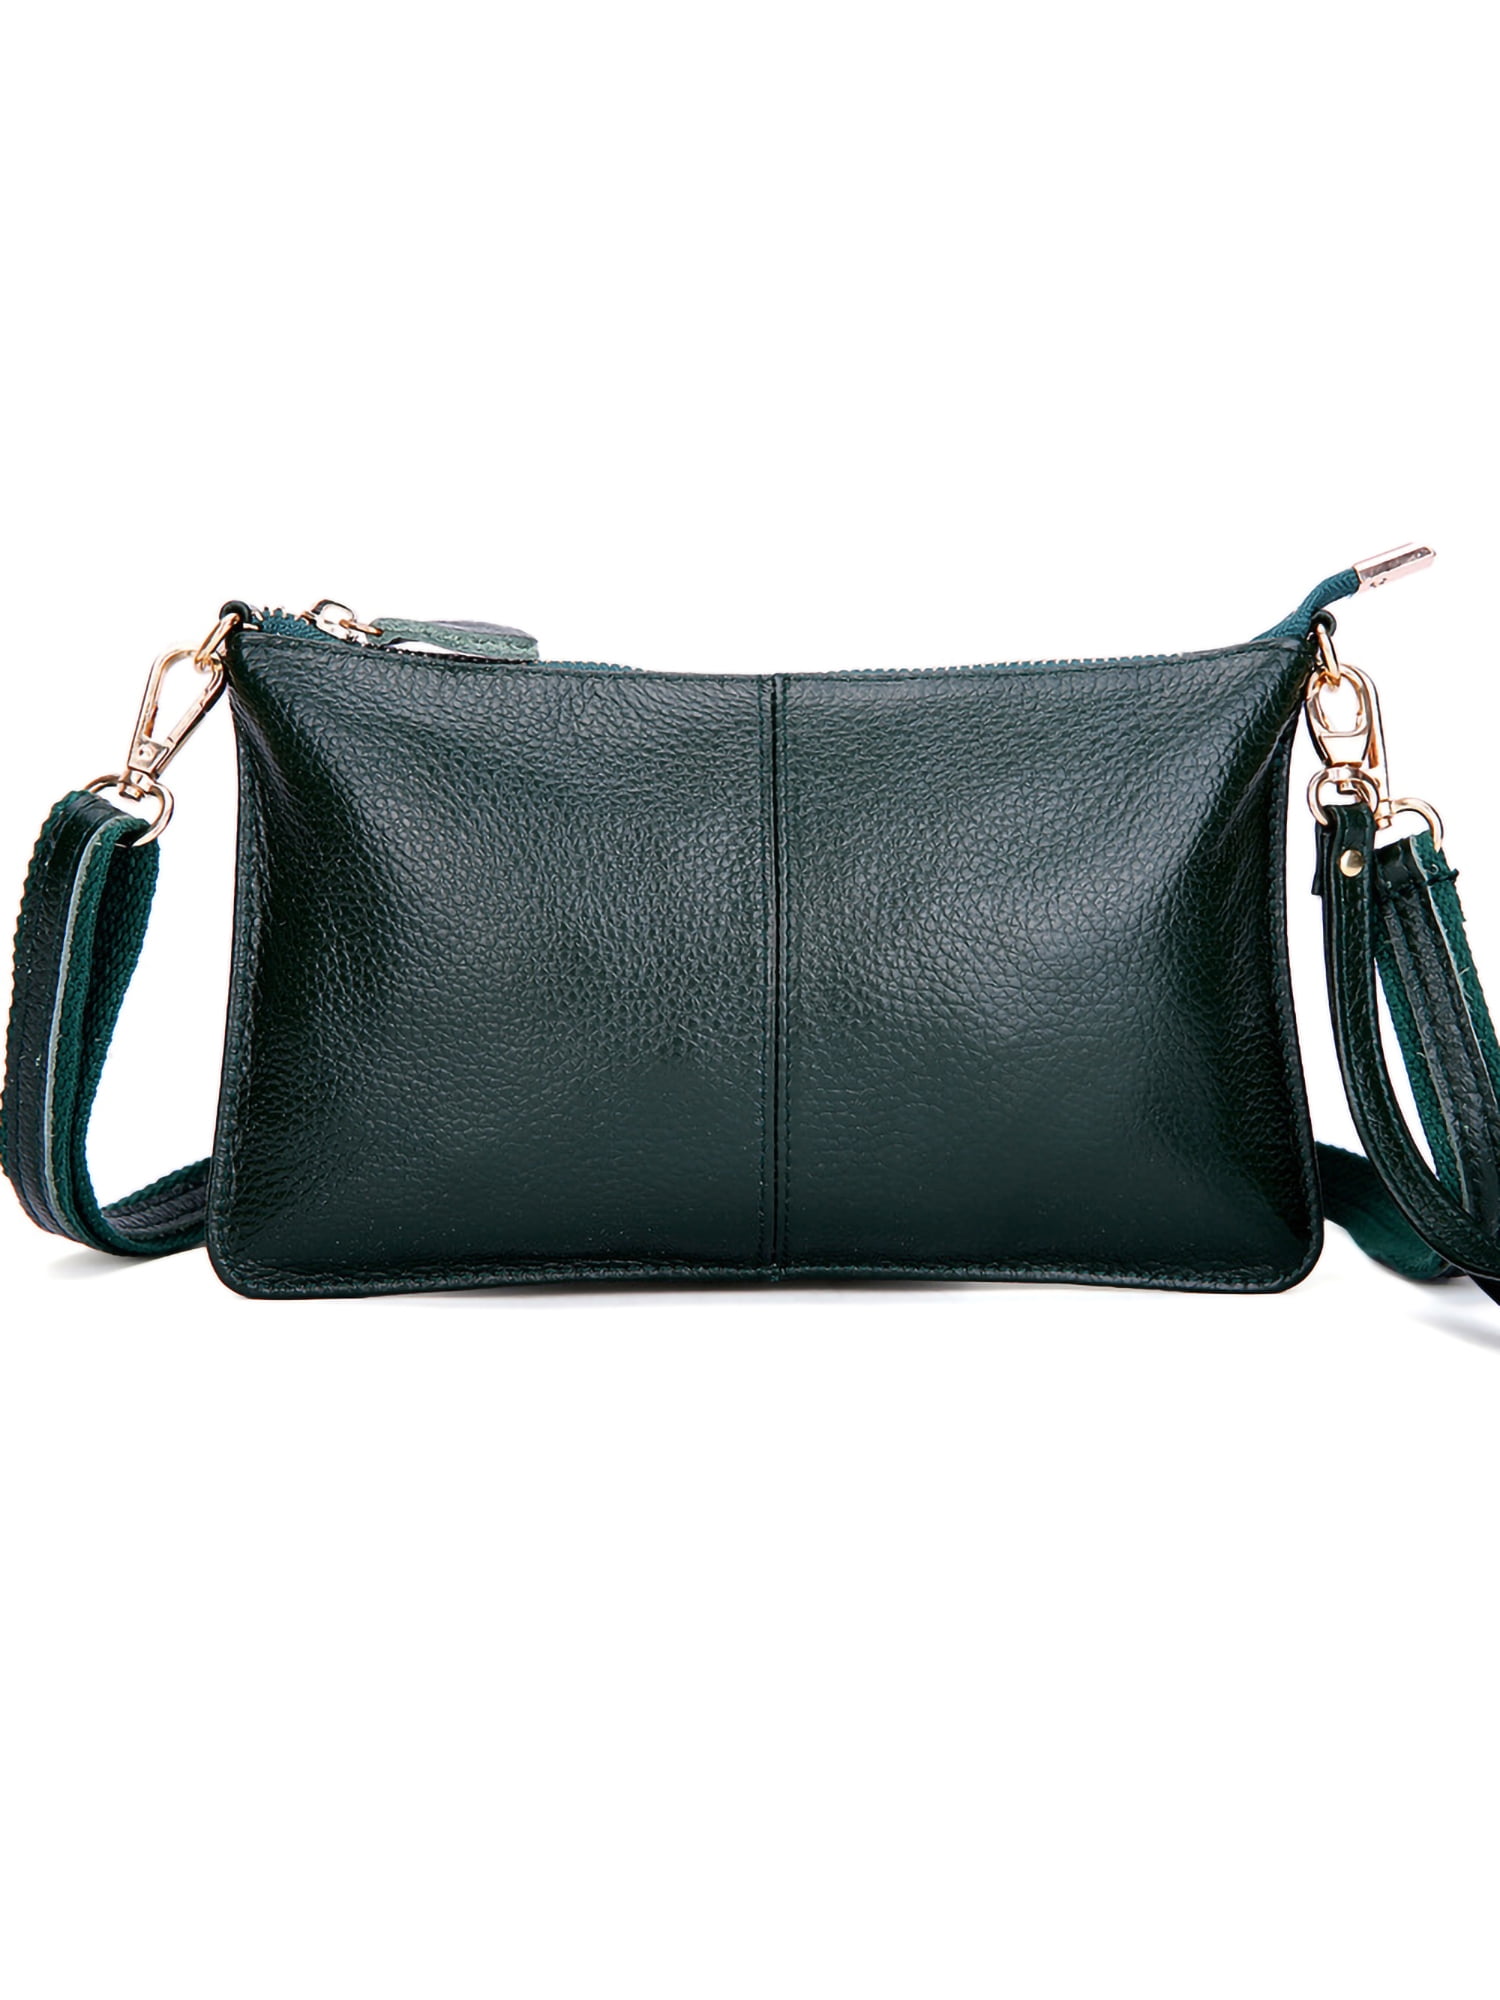 Small Genuine Leather Handbags Green Shoulder Bag for Ladies, Green